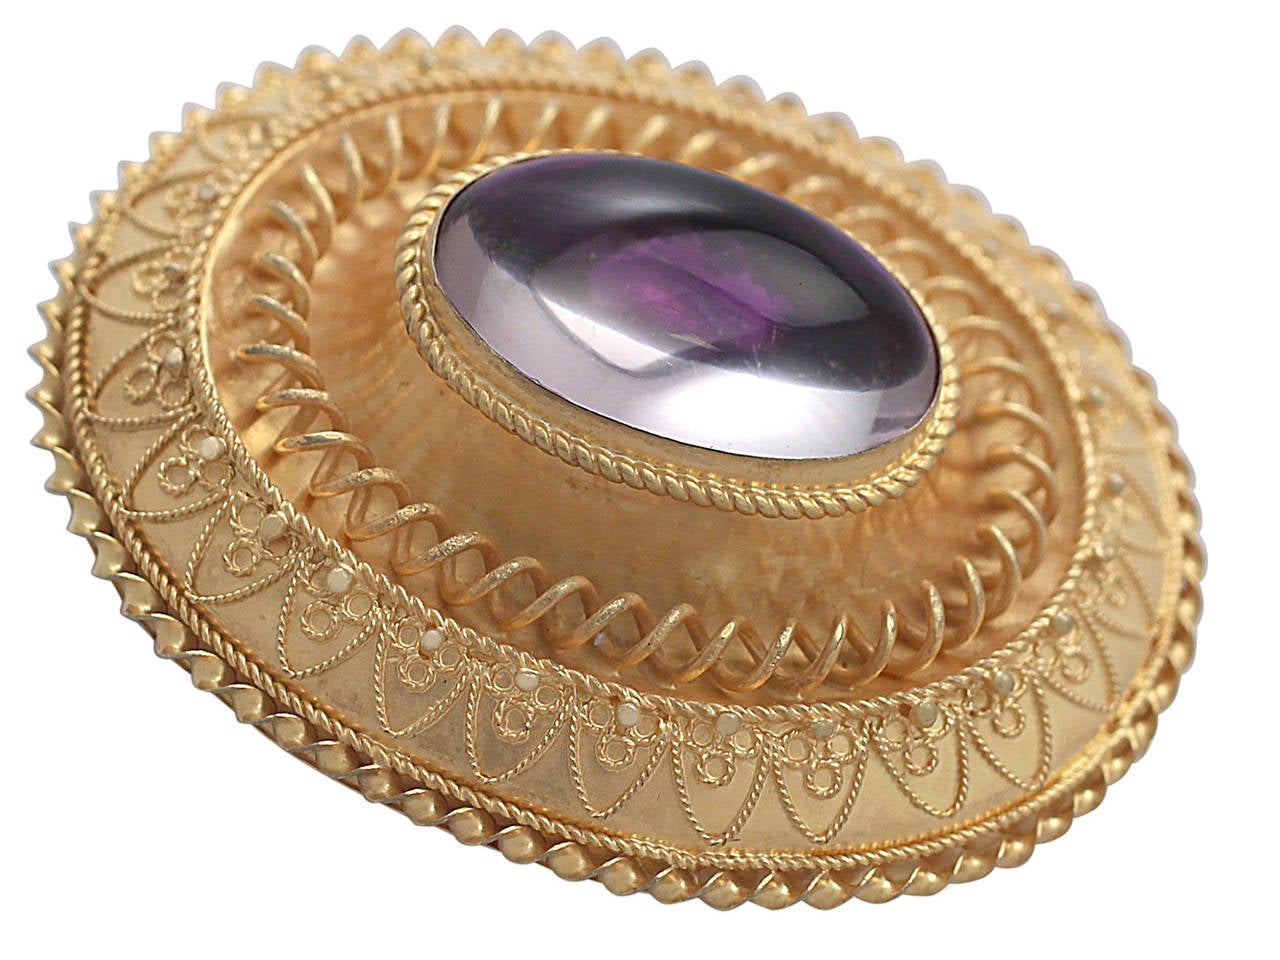 A fine and impressive antique Victorian paste and 15 karat yellow gold brooch; part of our antique jewelry and estate jewelry collections.

This impressive antique Victorian brooch has been crafted in 15k yellow gold.

The antique gold brooch